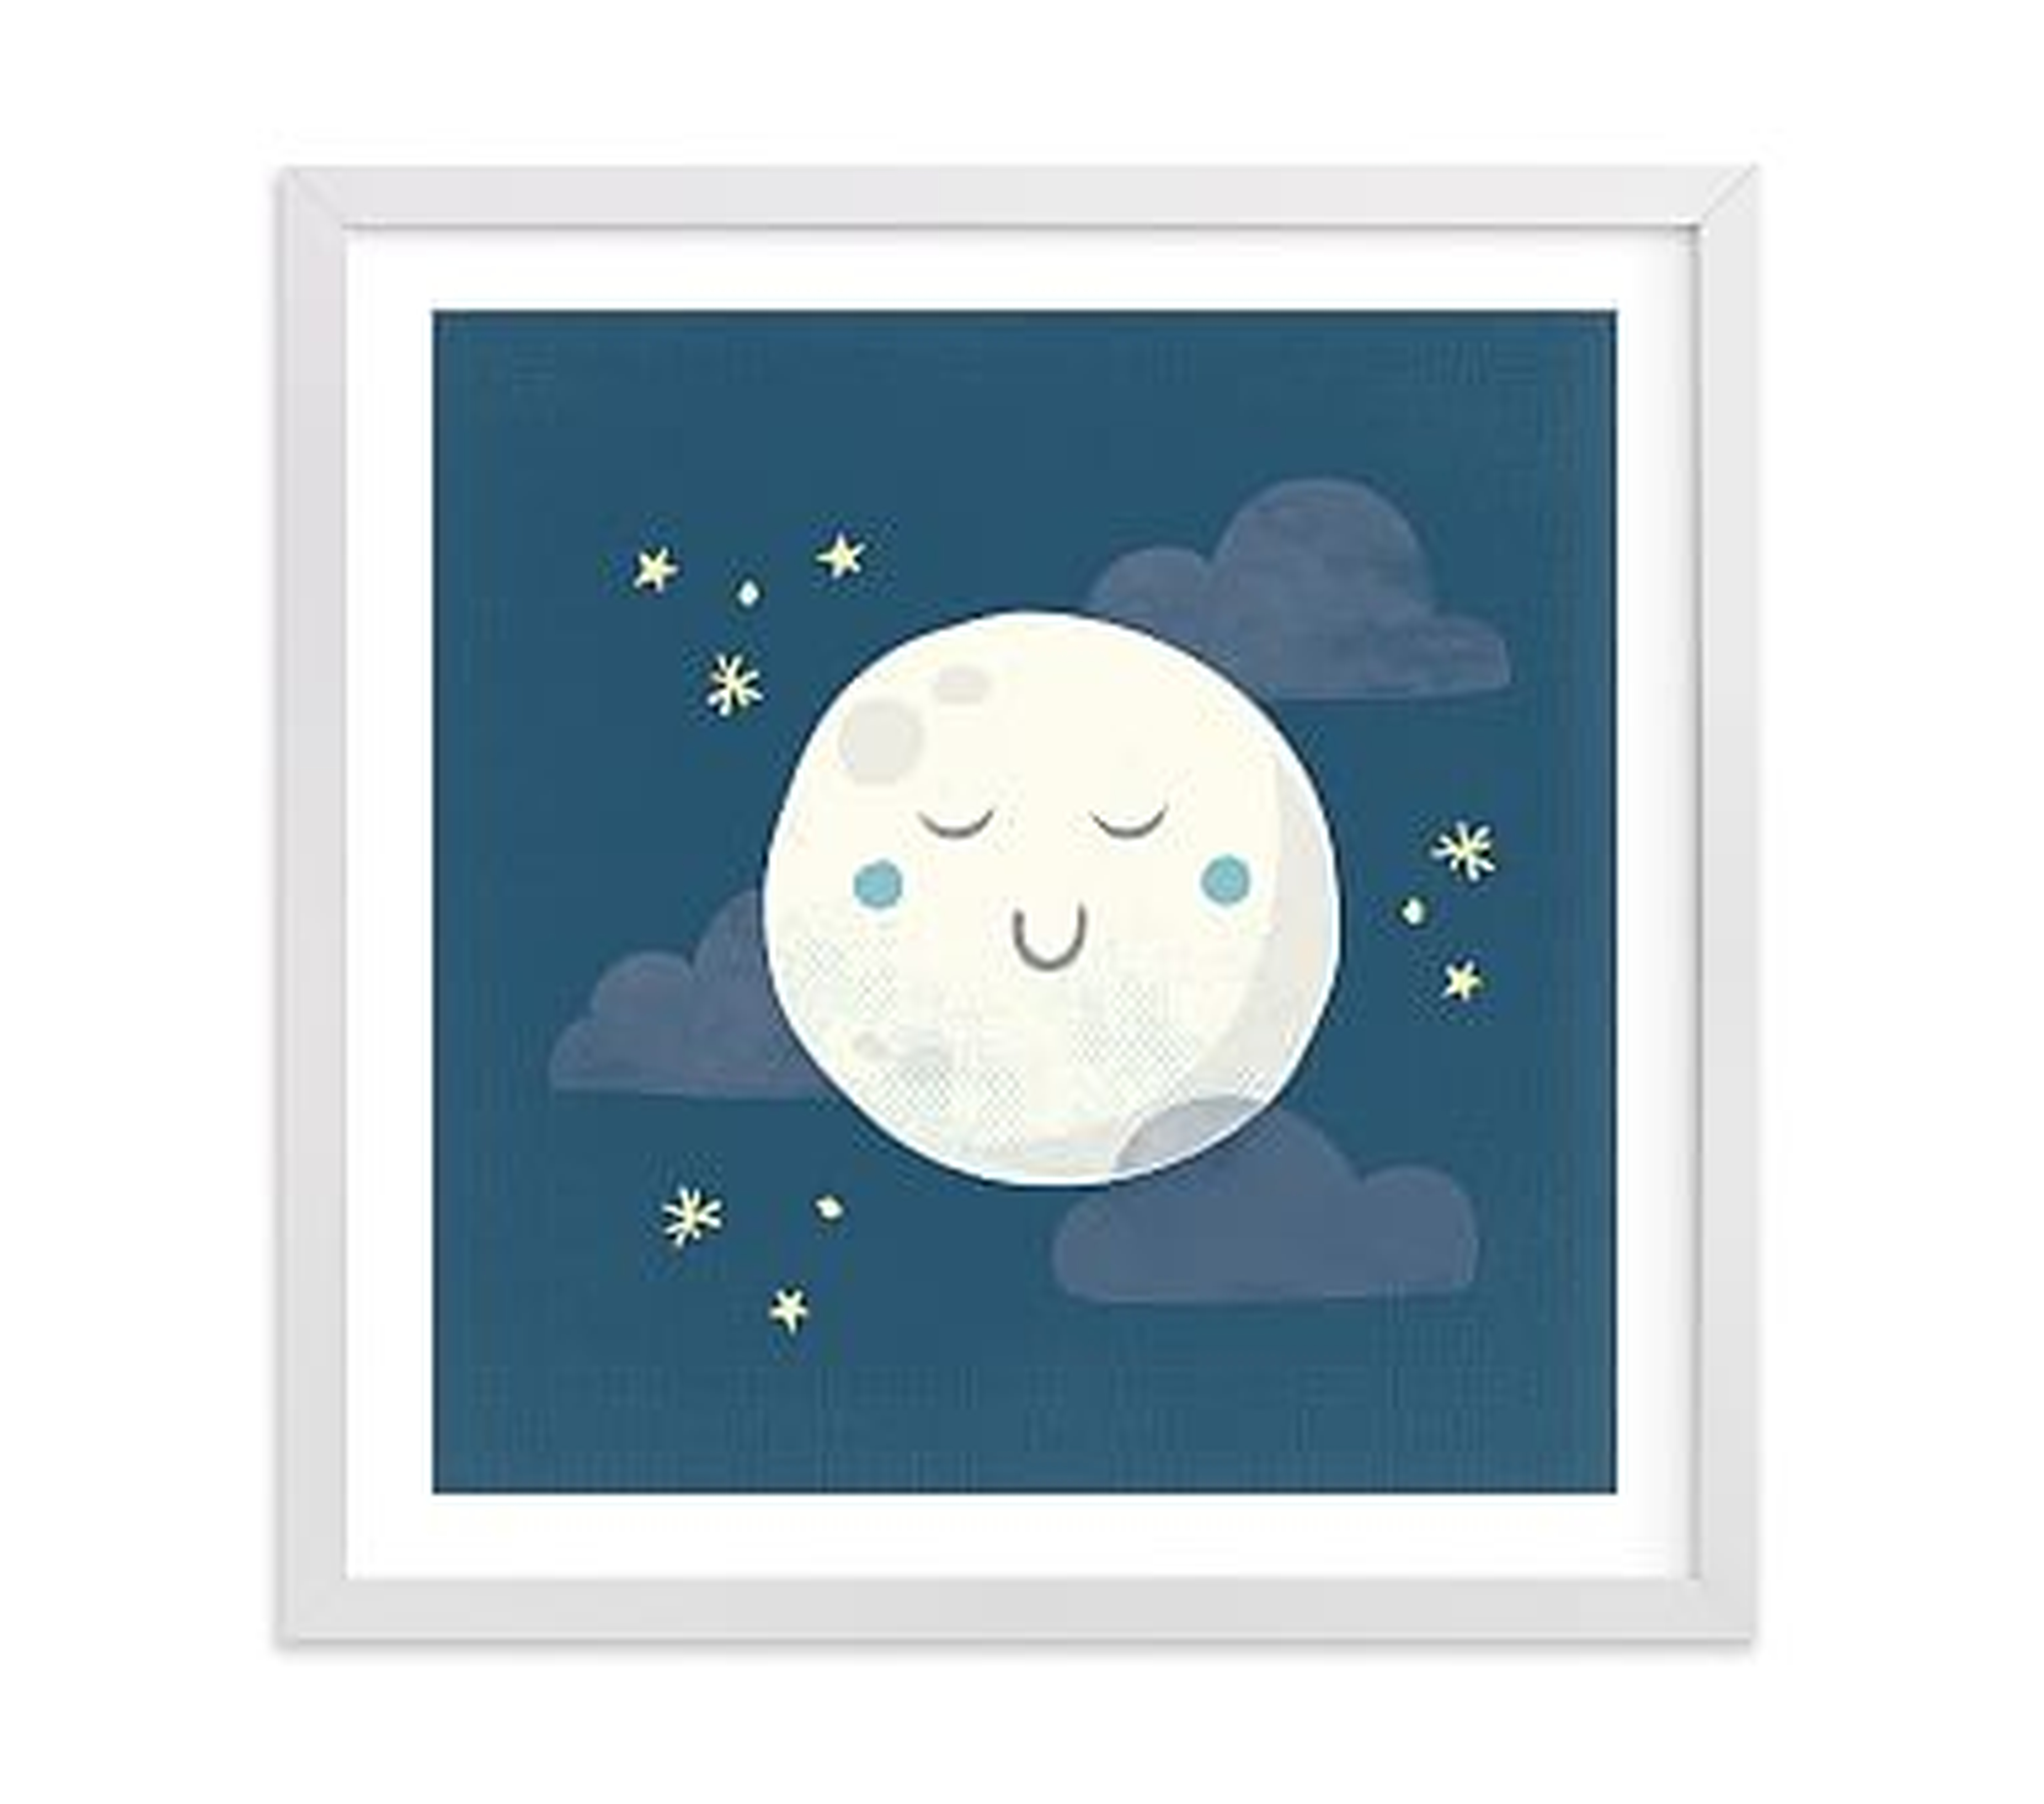 Goodnight Moon Wall Art by Minted(R) 24x24, White - Pottery Barn Kids